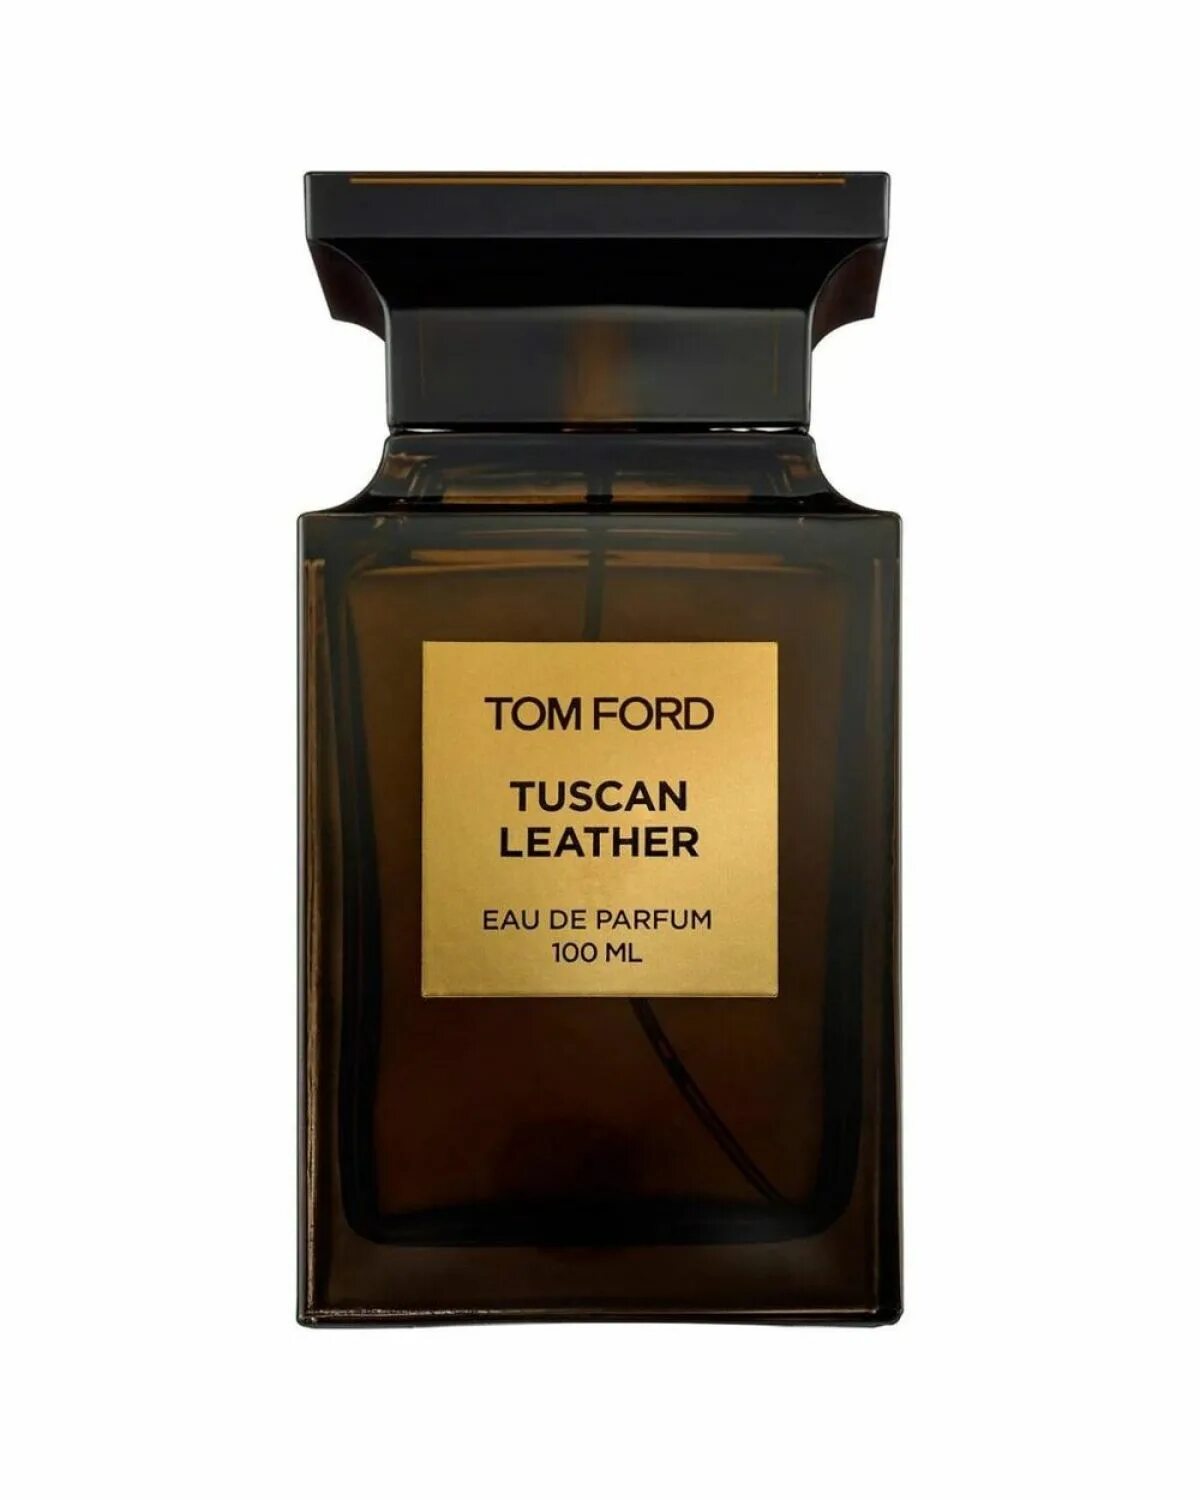 Tom Ford Tuscan Leather 100ml. Tom Ford Tuscan Leather 100 мл. Tom Ford White Suede 100 ml. Tobacco Vanille Tom Ford 100мл. Том форд золотые духи